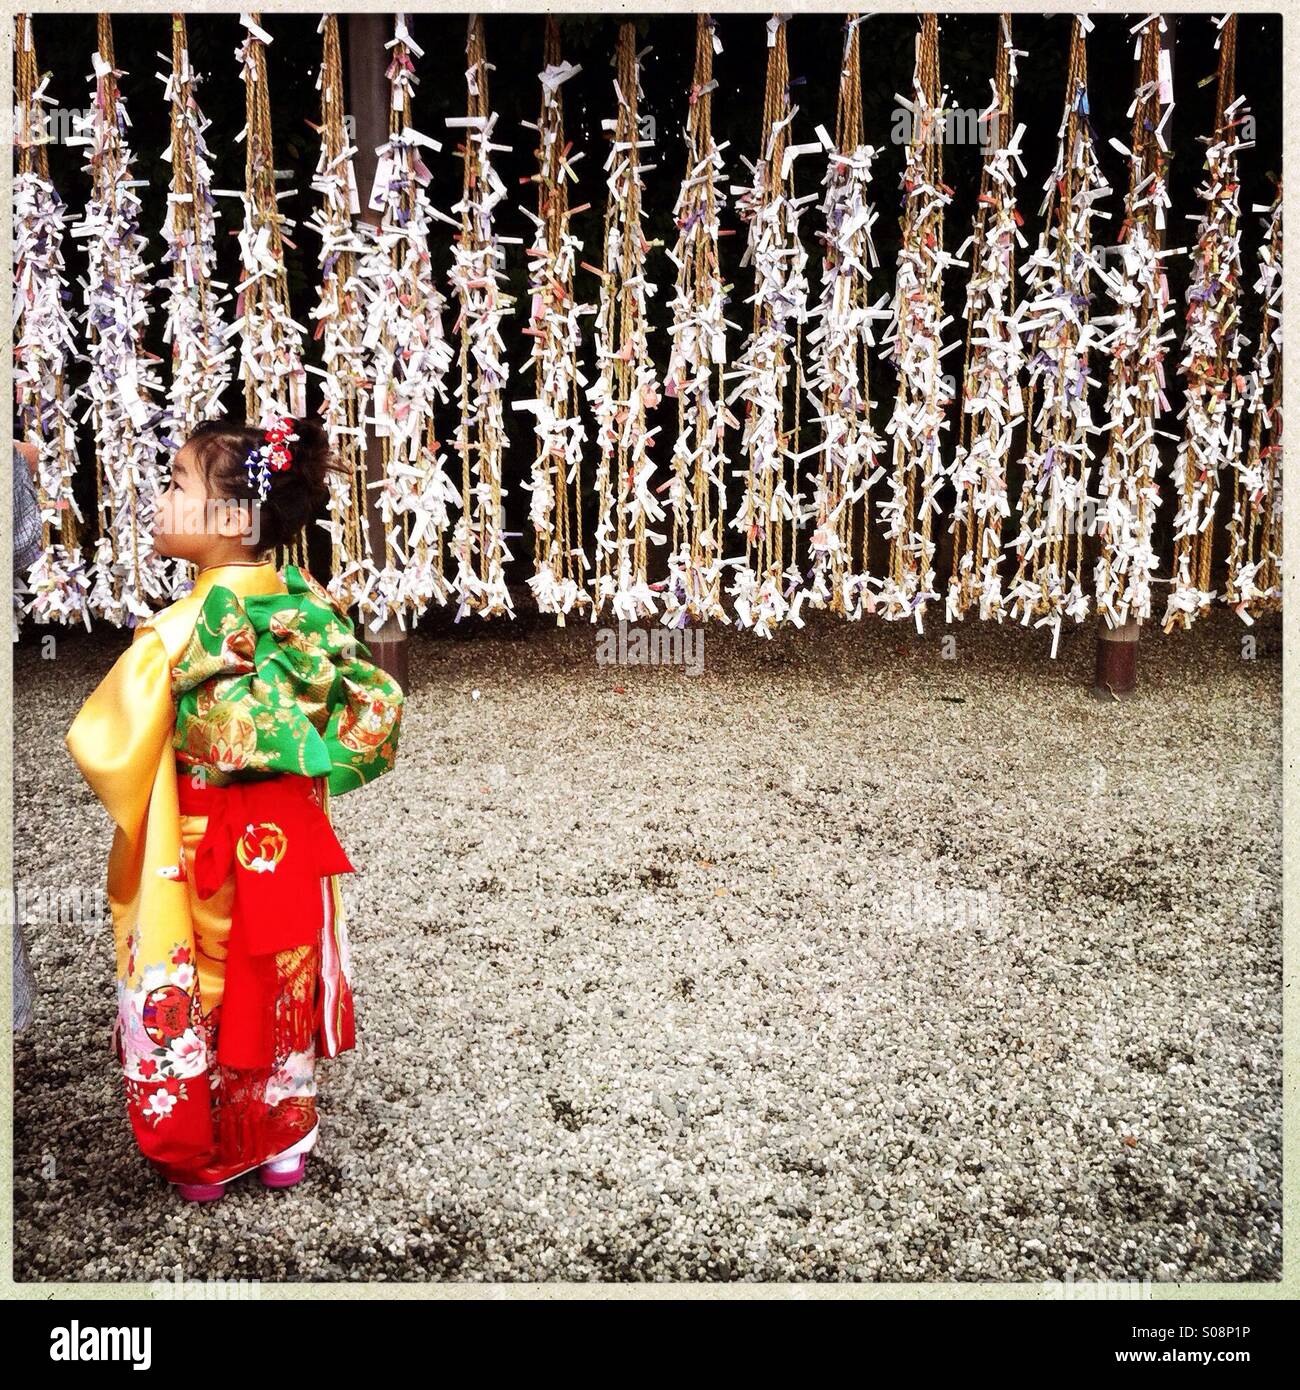 A Japanese girl dressed in traditional kimono for Shichi-Go-San, Japanese traditional event to celebrate the growth of children. Stock Photo